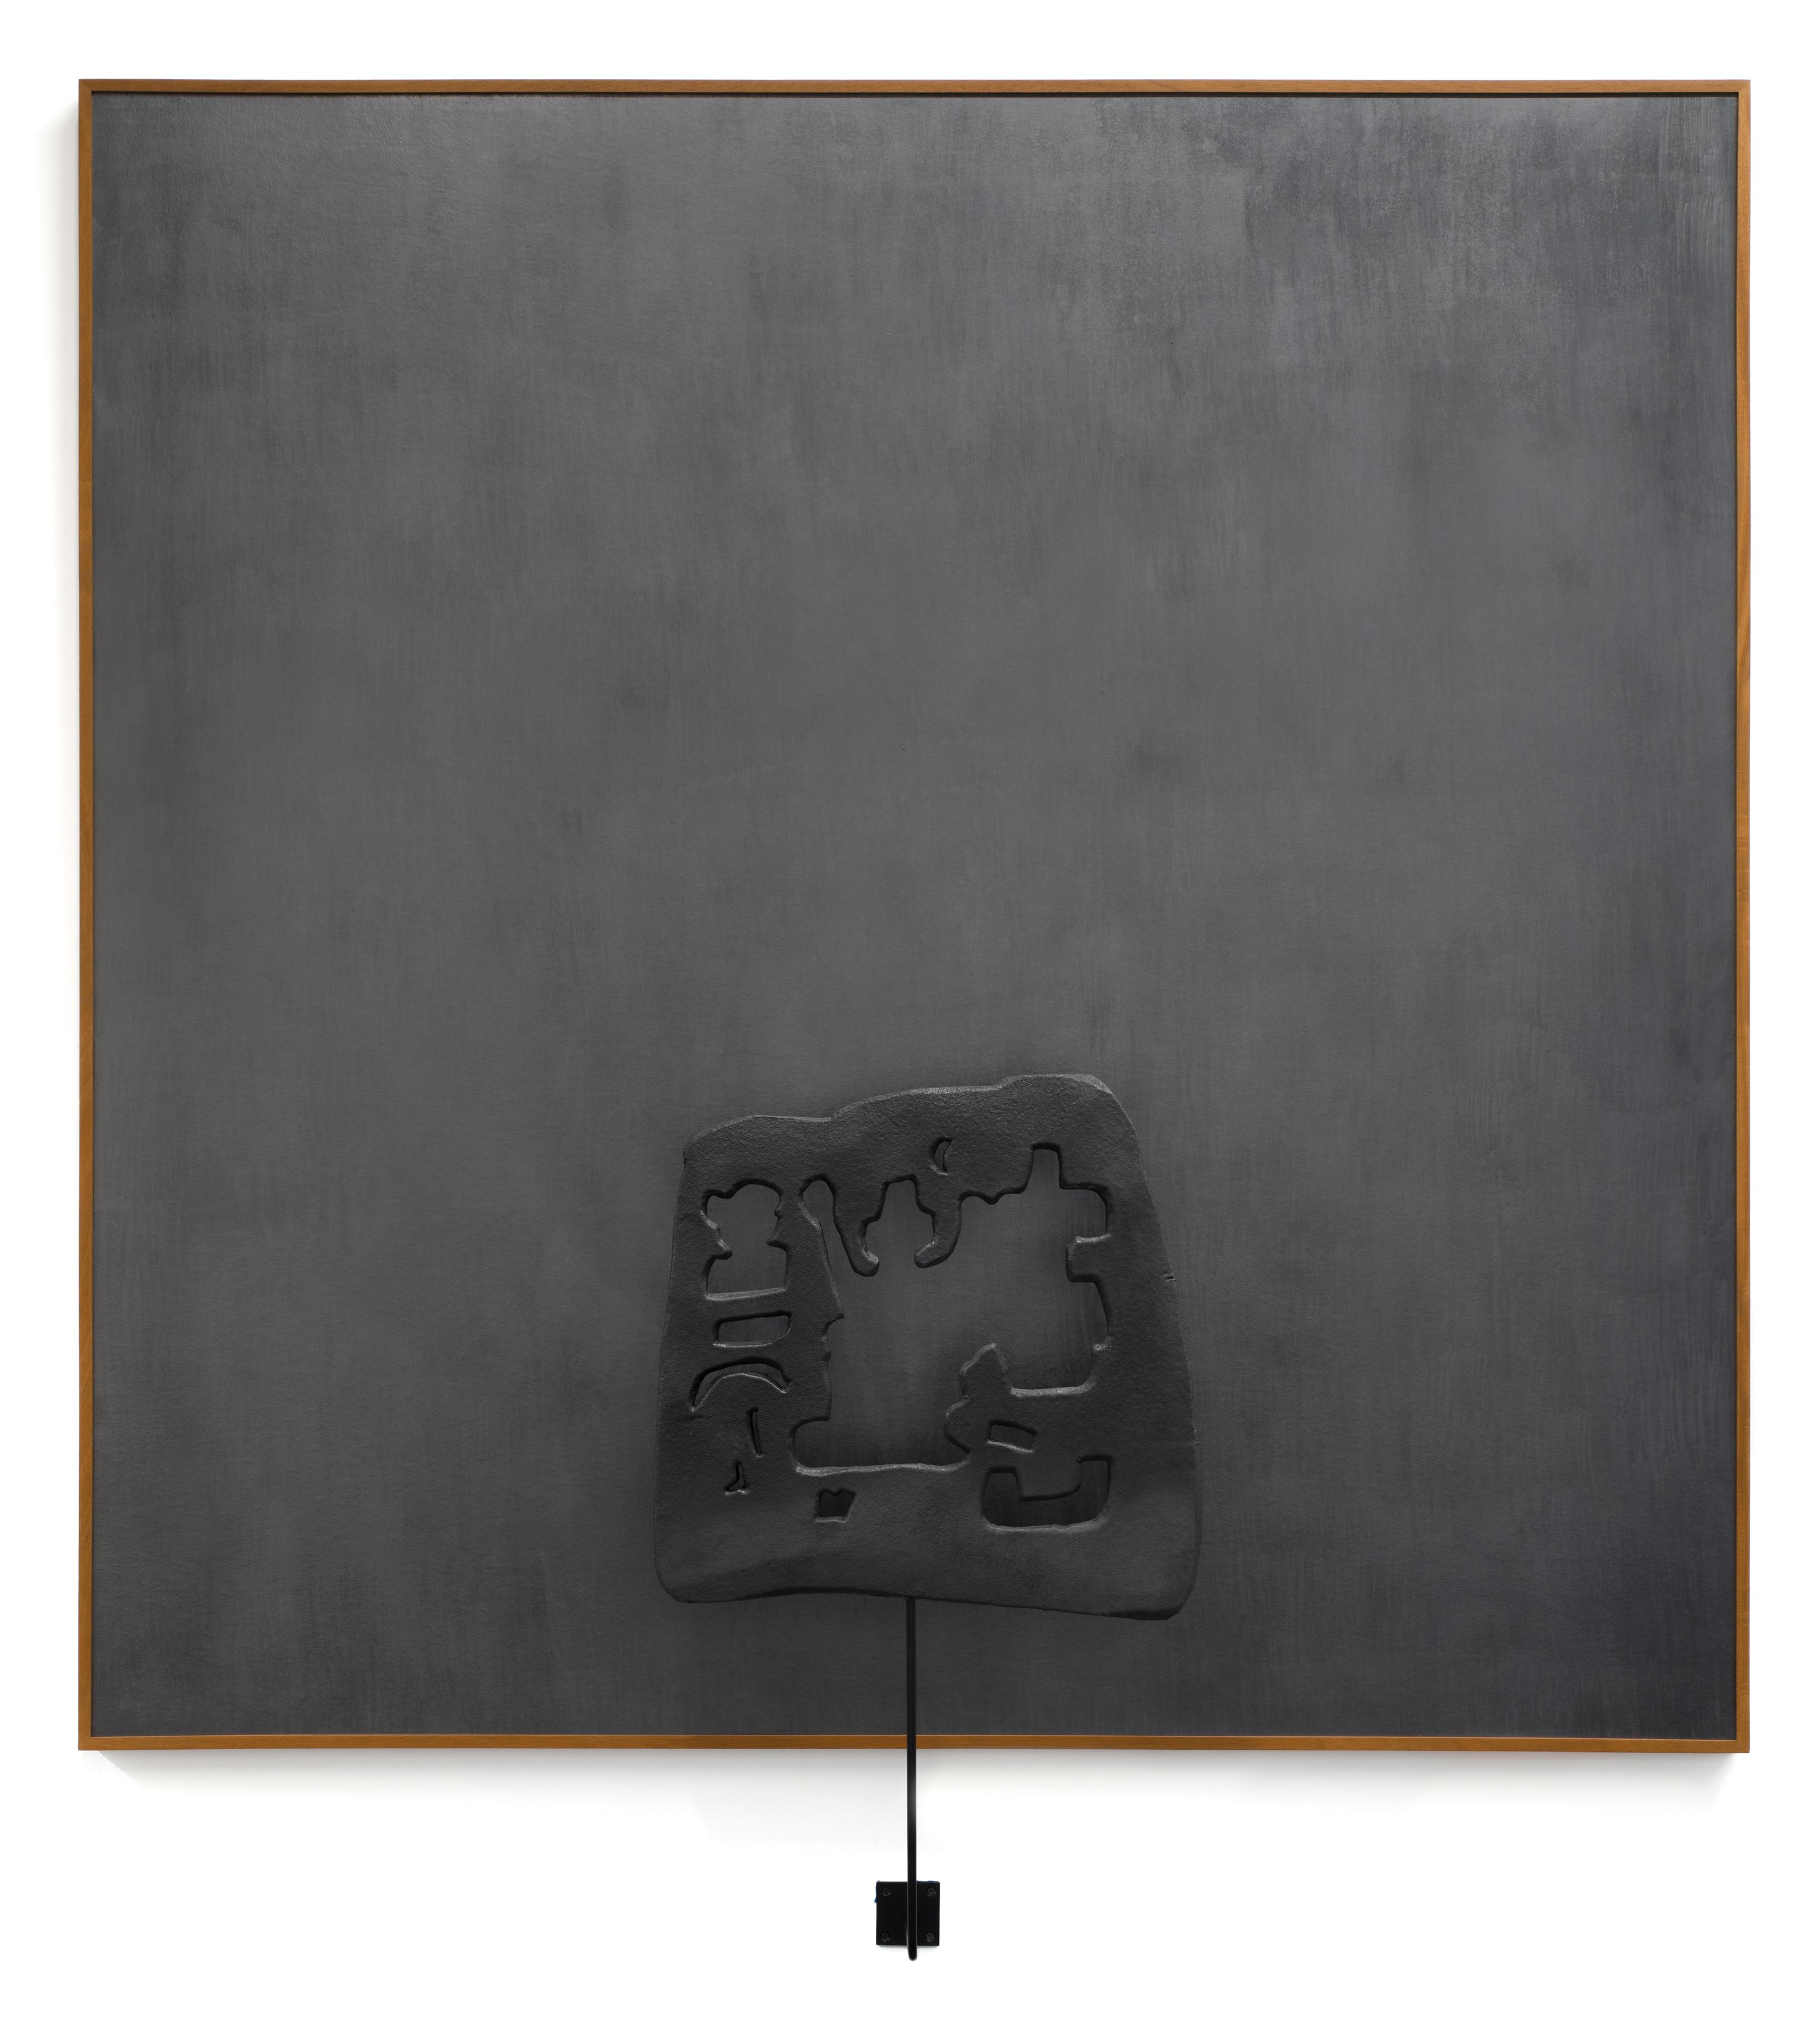 a square frame filled with a uniform dark matte gray with a metal sculpture affixed